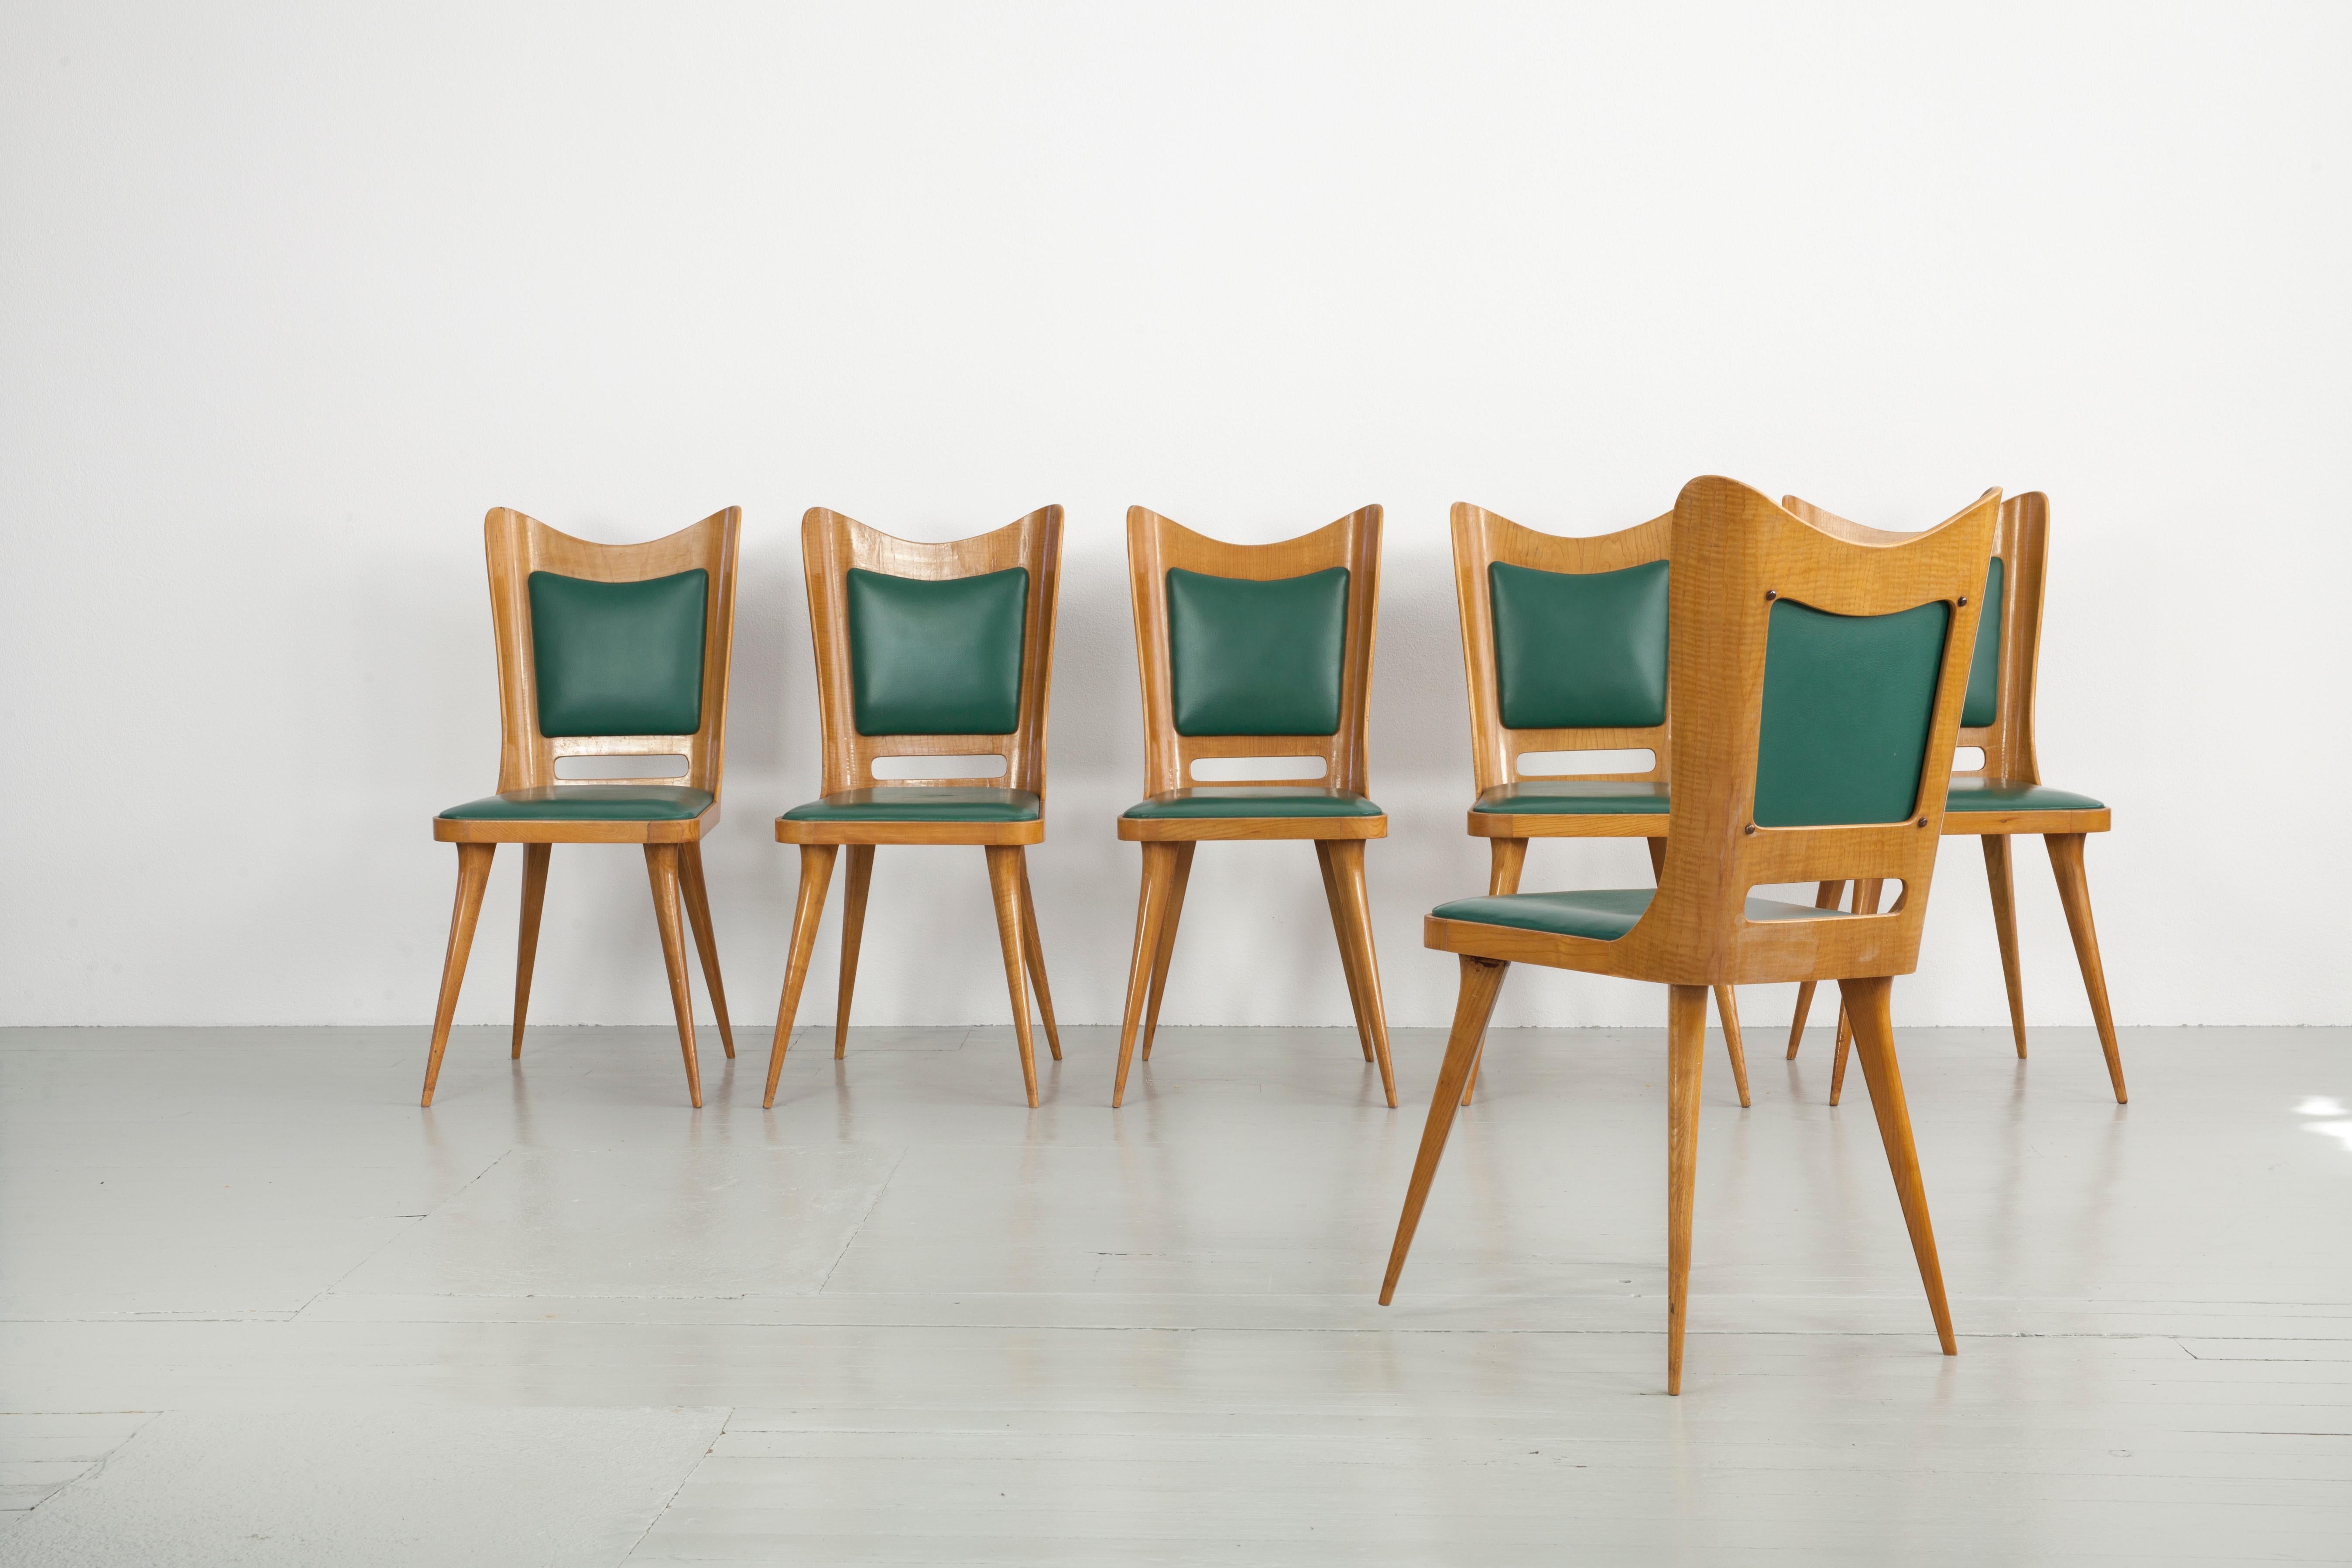 Set of Six Italian Wooden Dining Chairs with Green Upholstery, 1950 For Sale 4